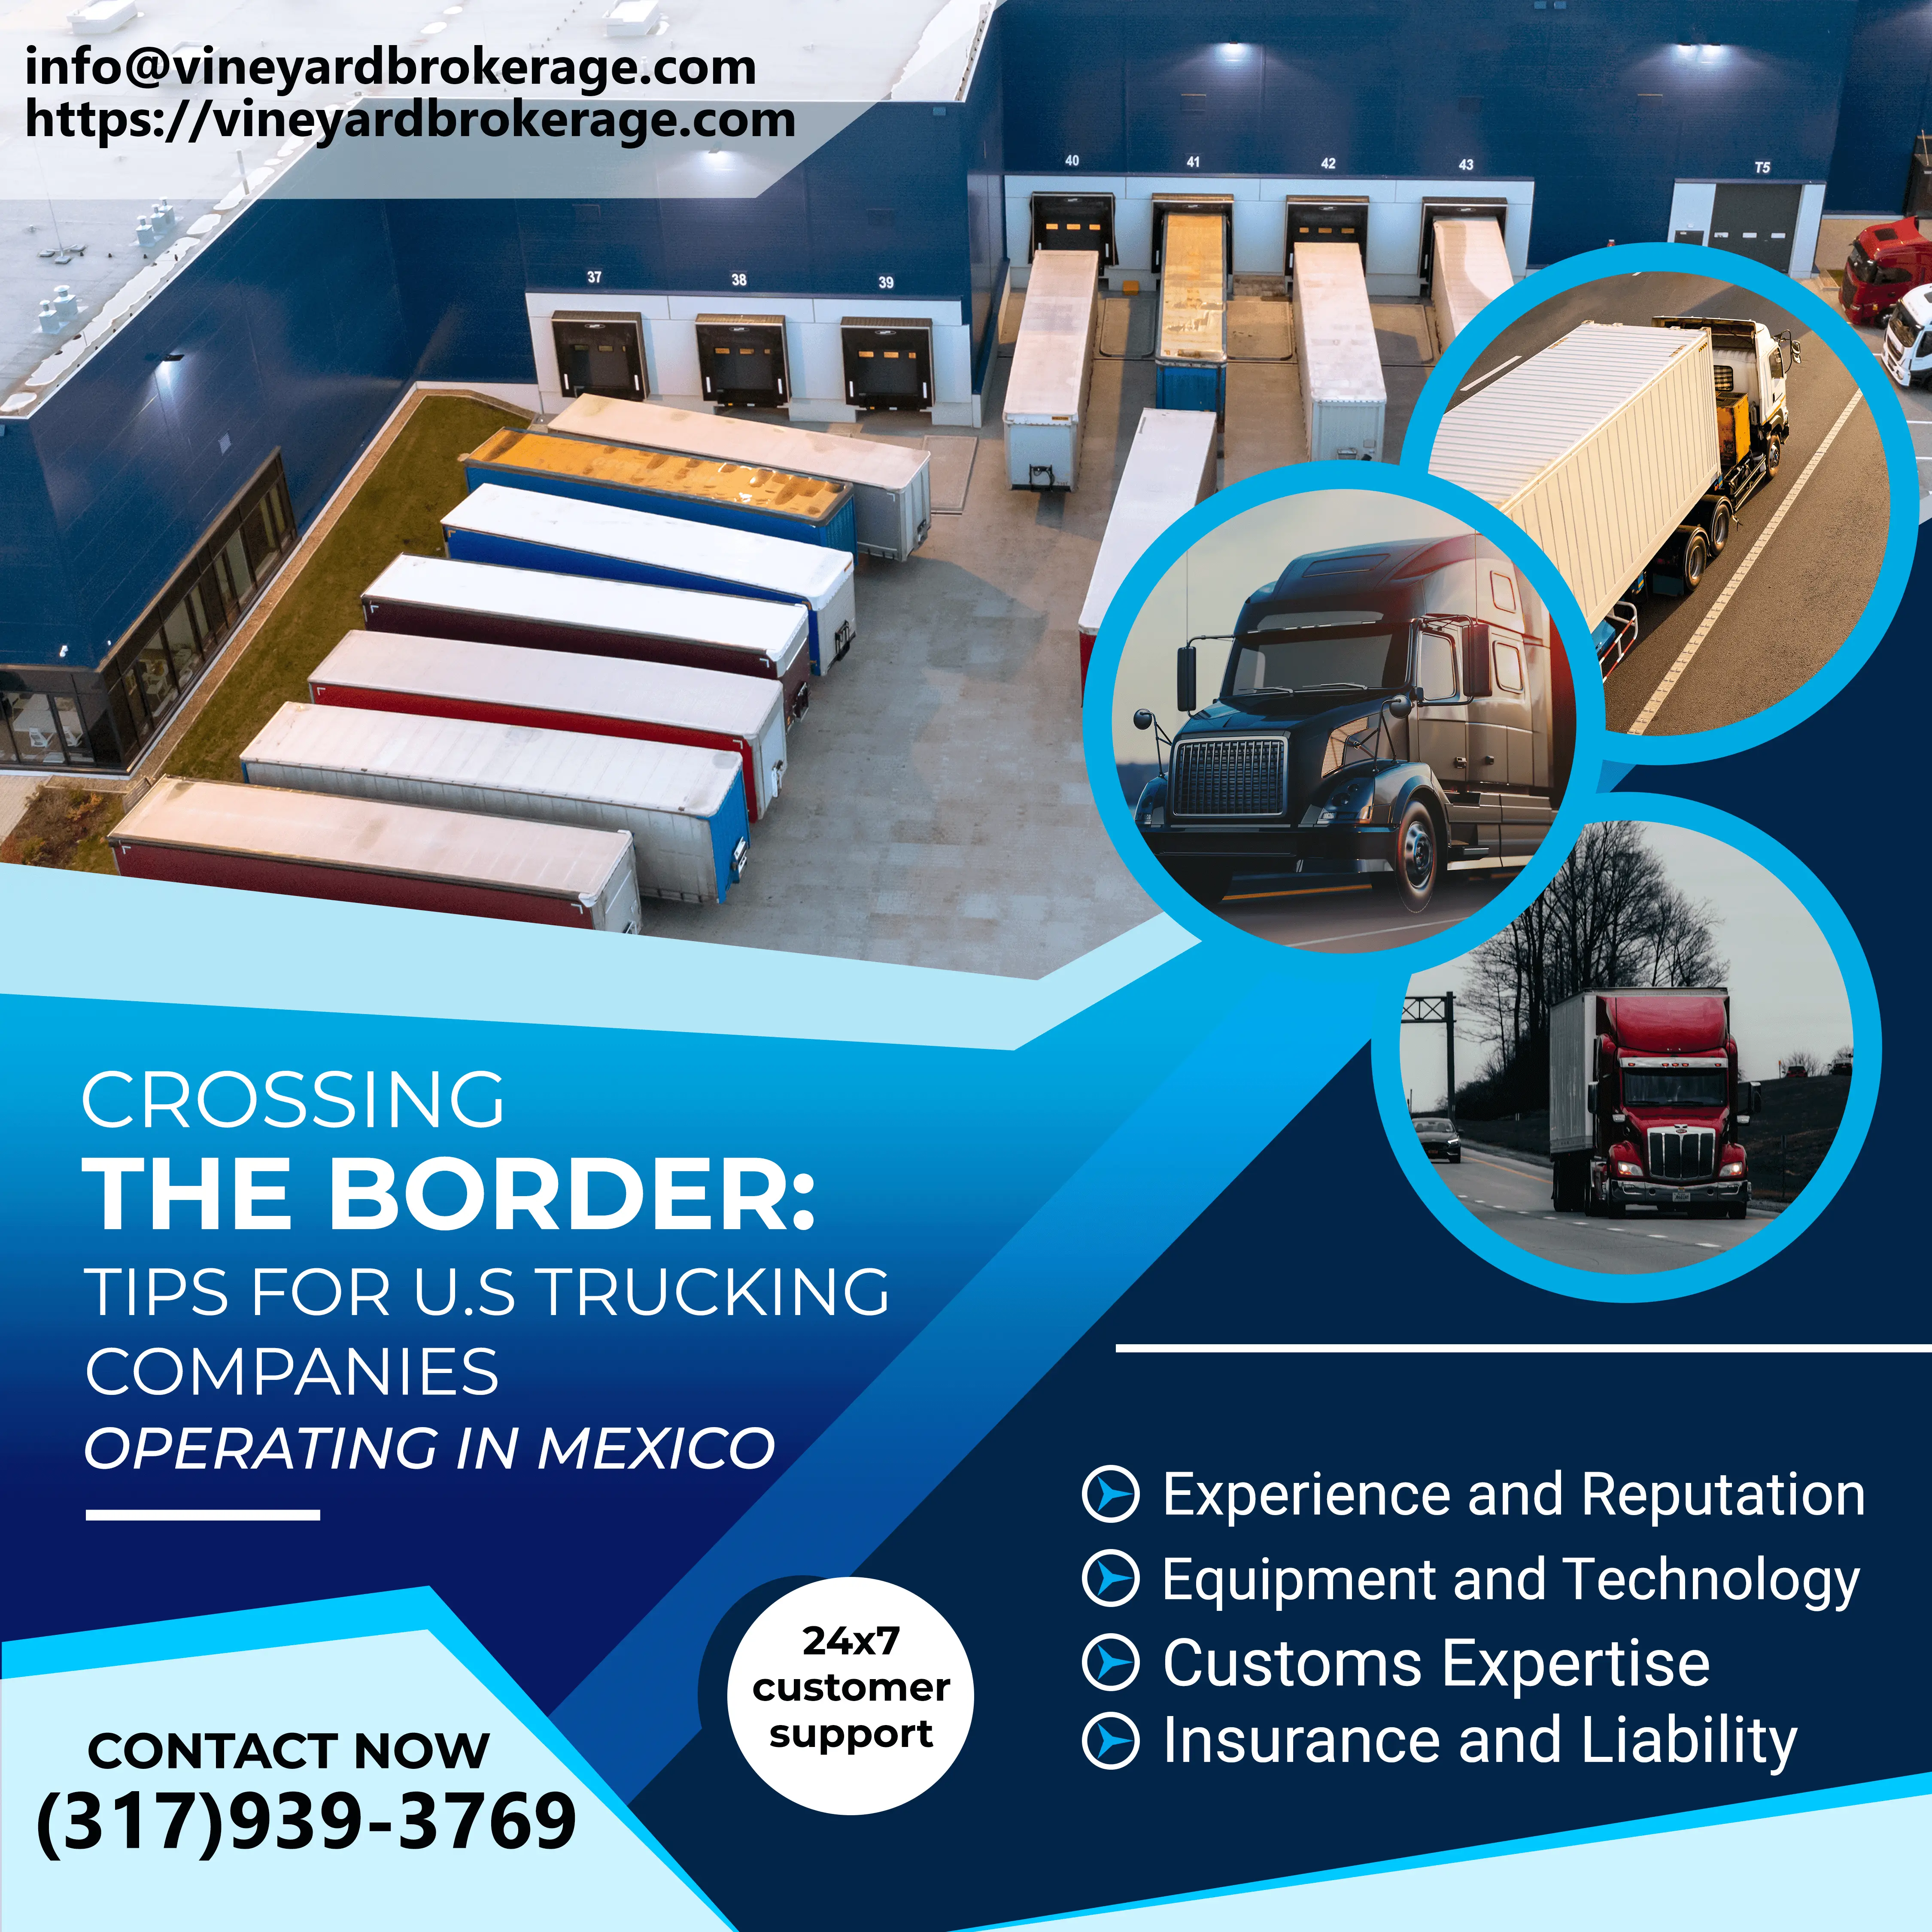 Crossing the Border: Tips for U.S. Trucking Companies Operating in Mexico